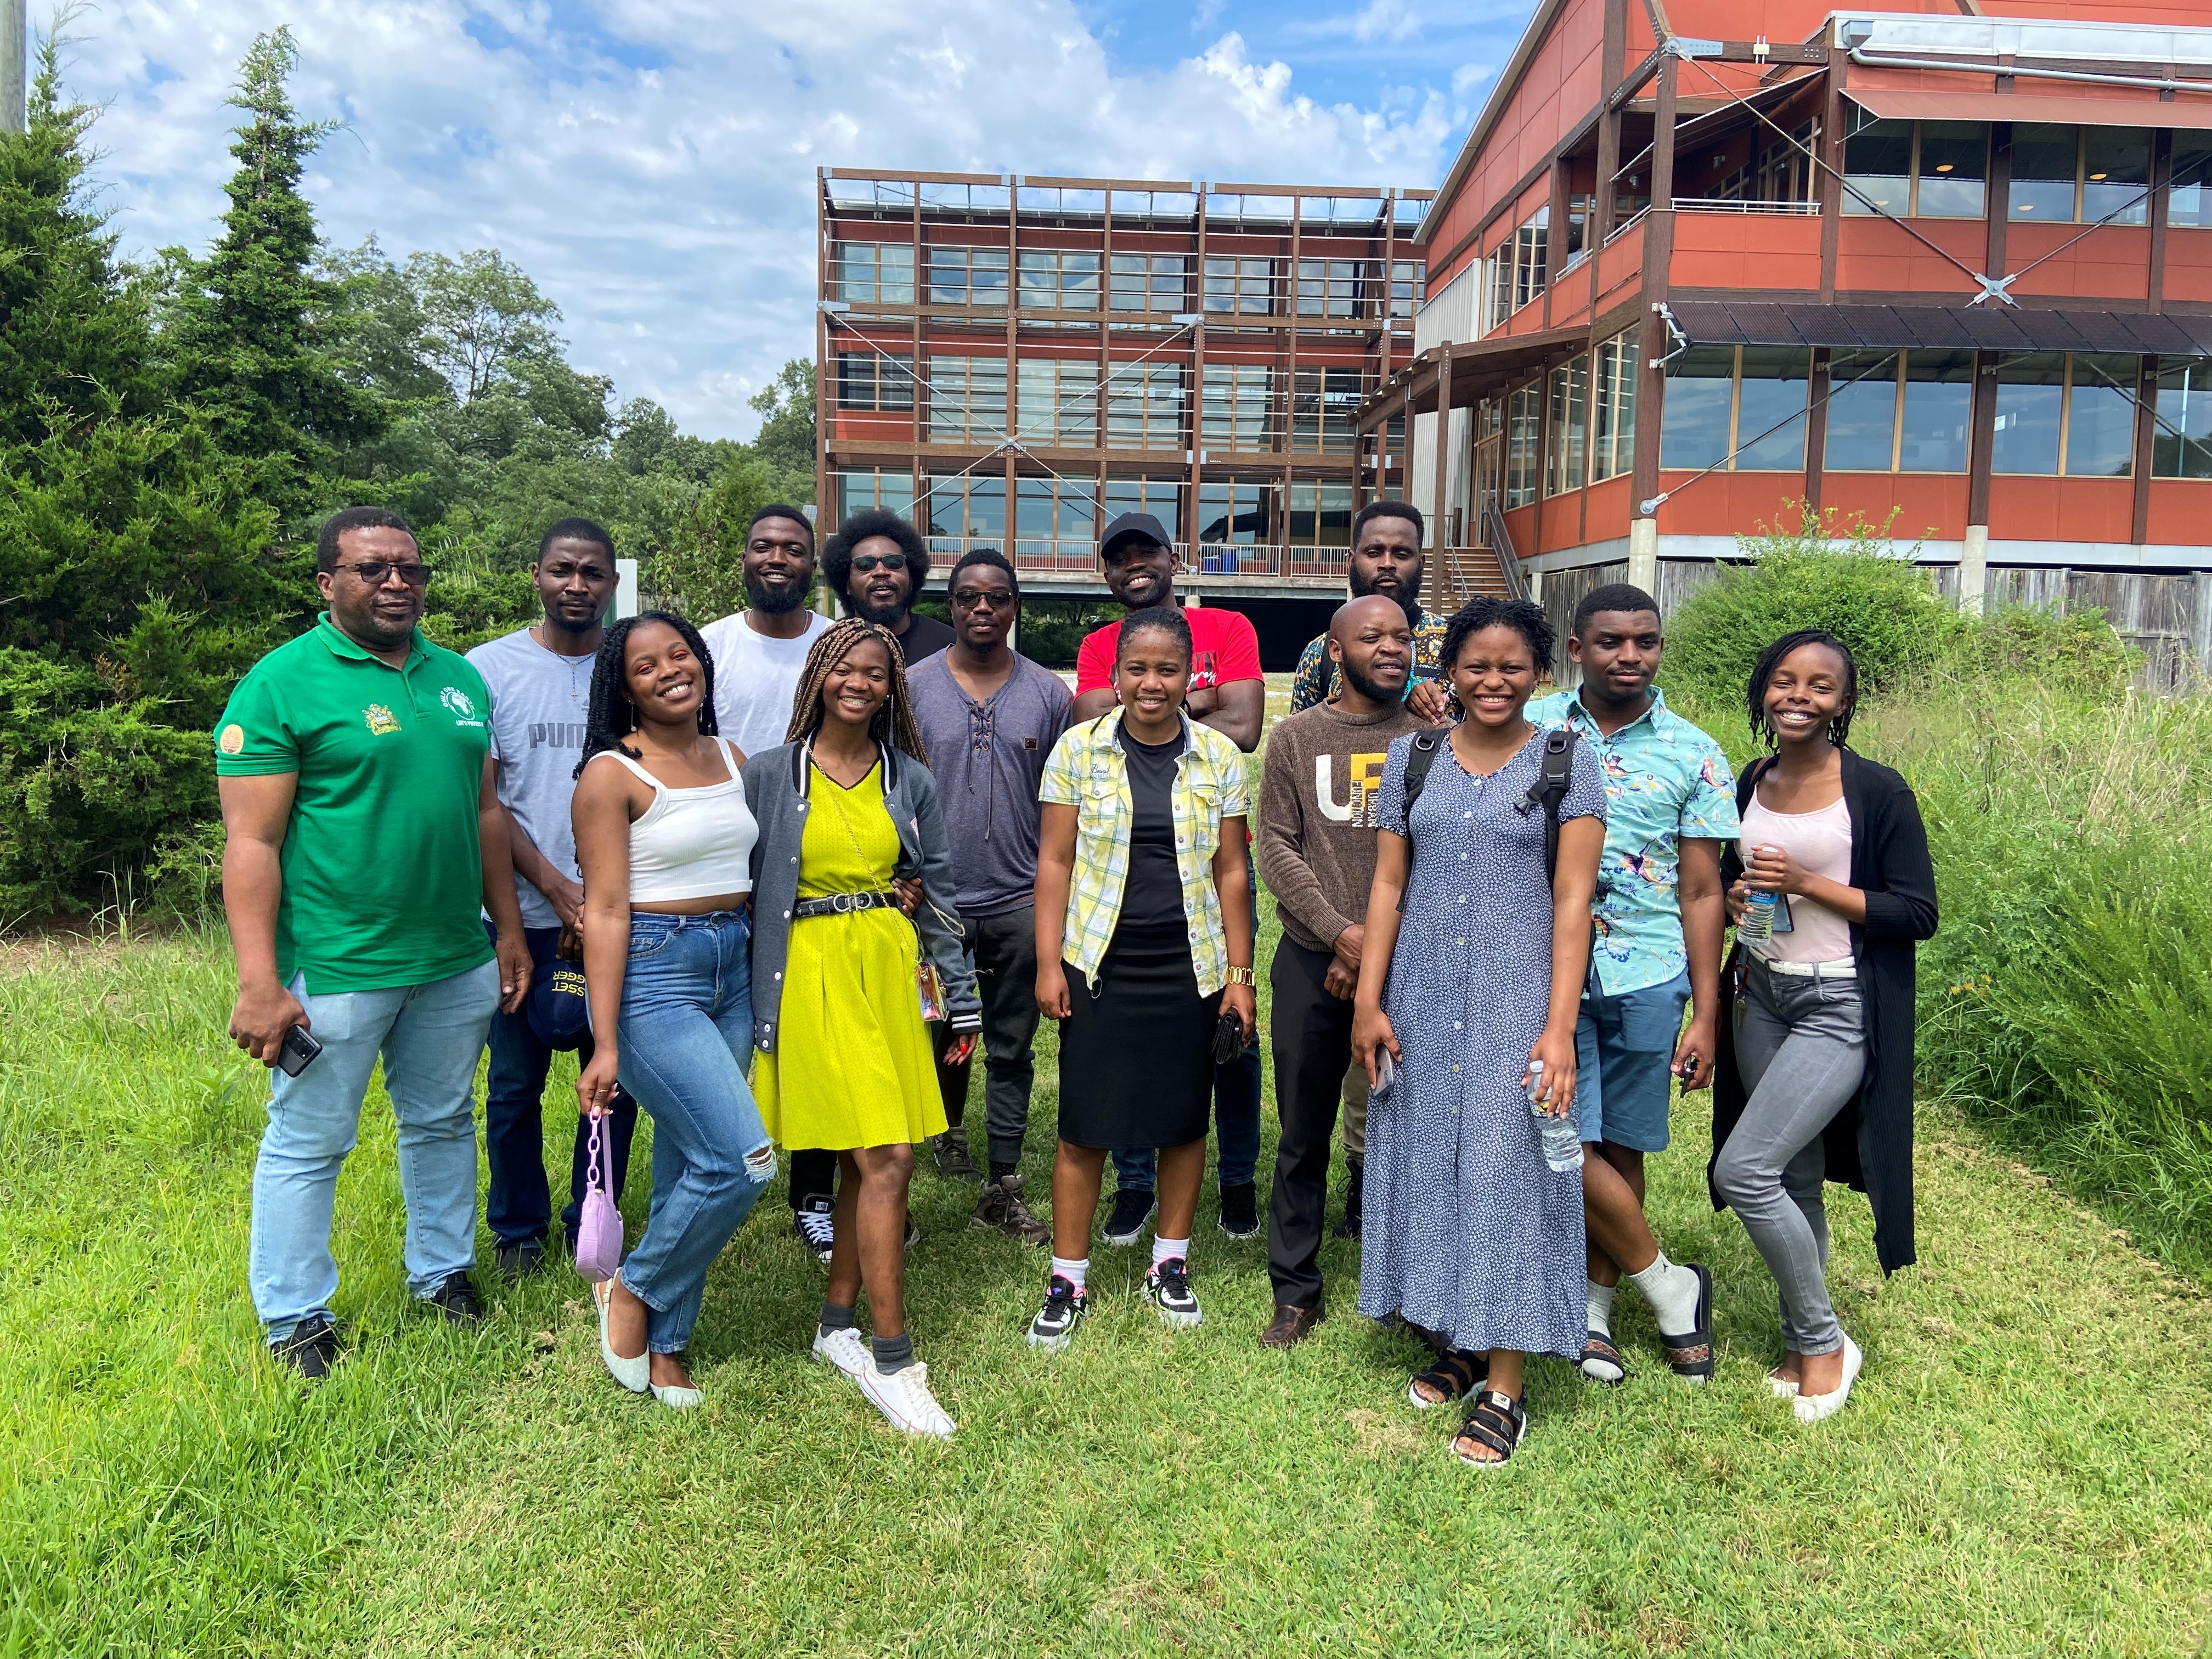 Environmental Justice, Human Rights, and Public Health on a Global Scale: The University of Malawi and The University of Maryland Exchange Program